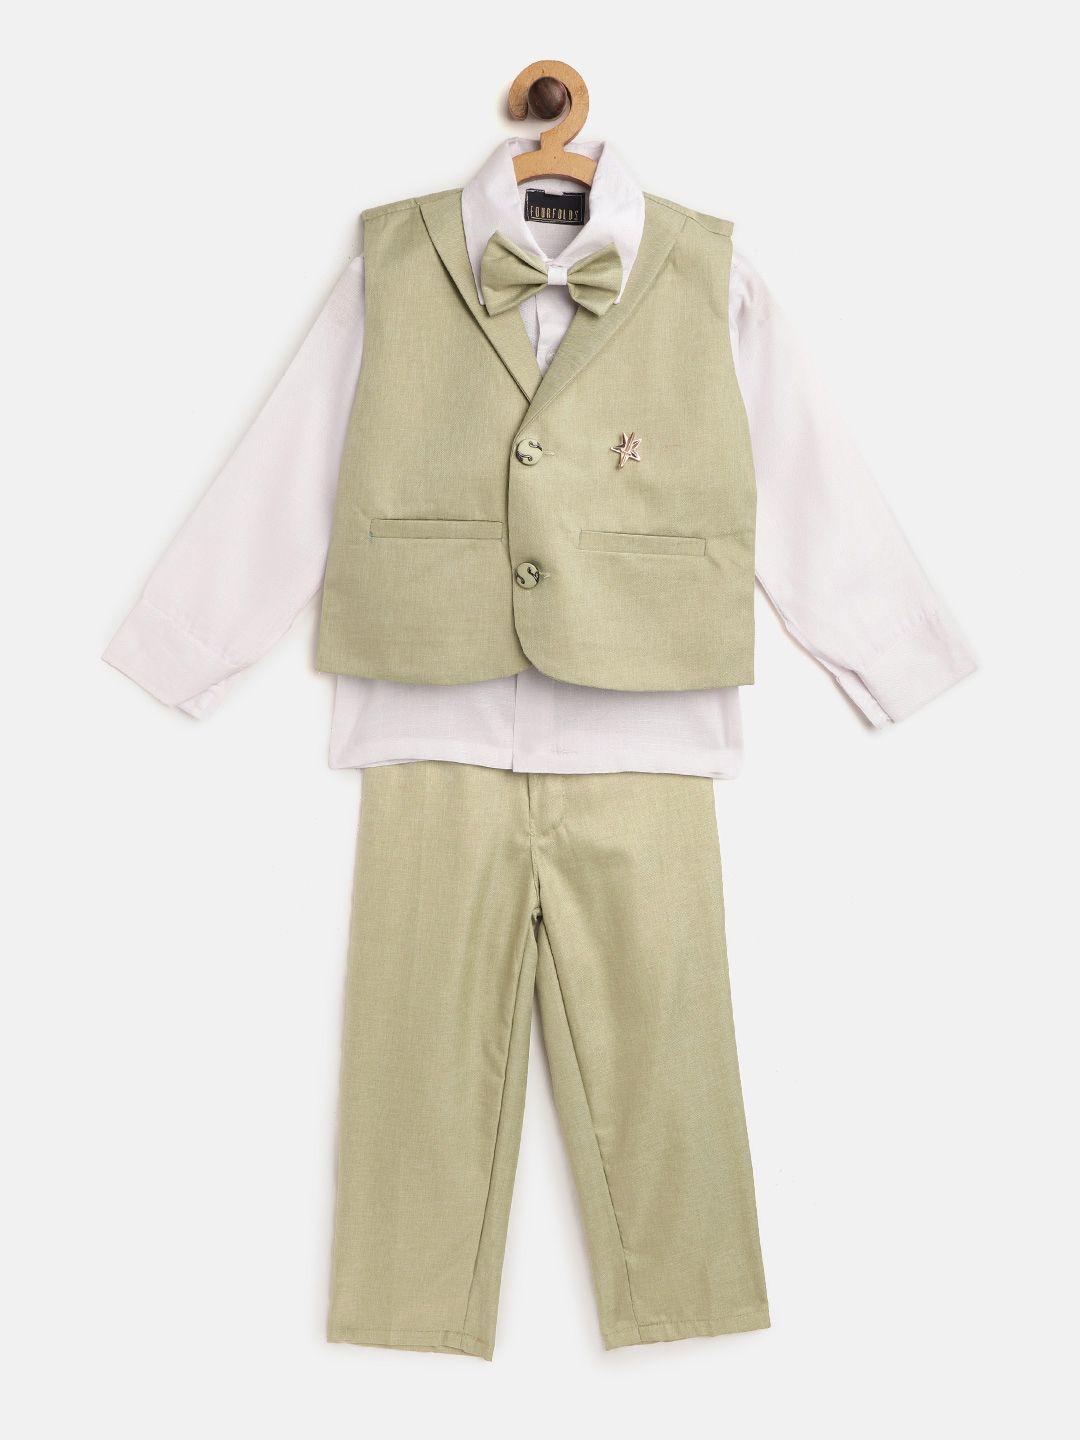 fourfolds-boys-white-&-green-solid-clothing-set-with-bow-tie